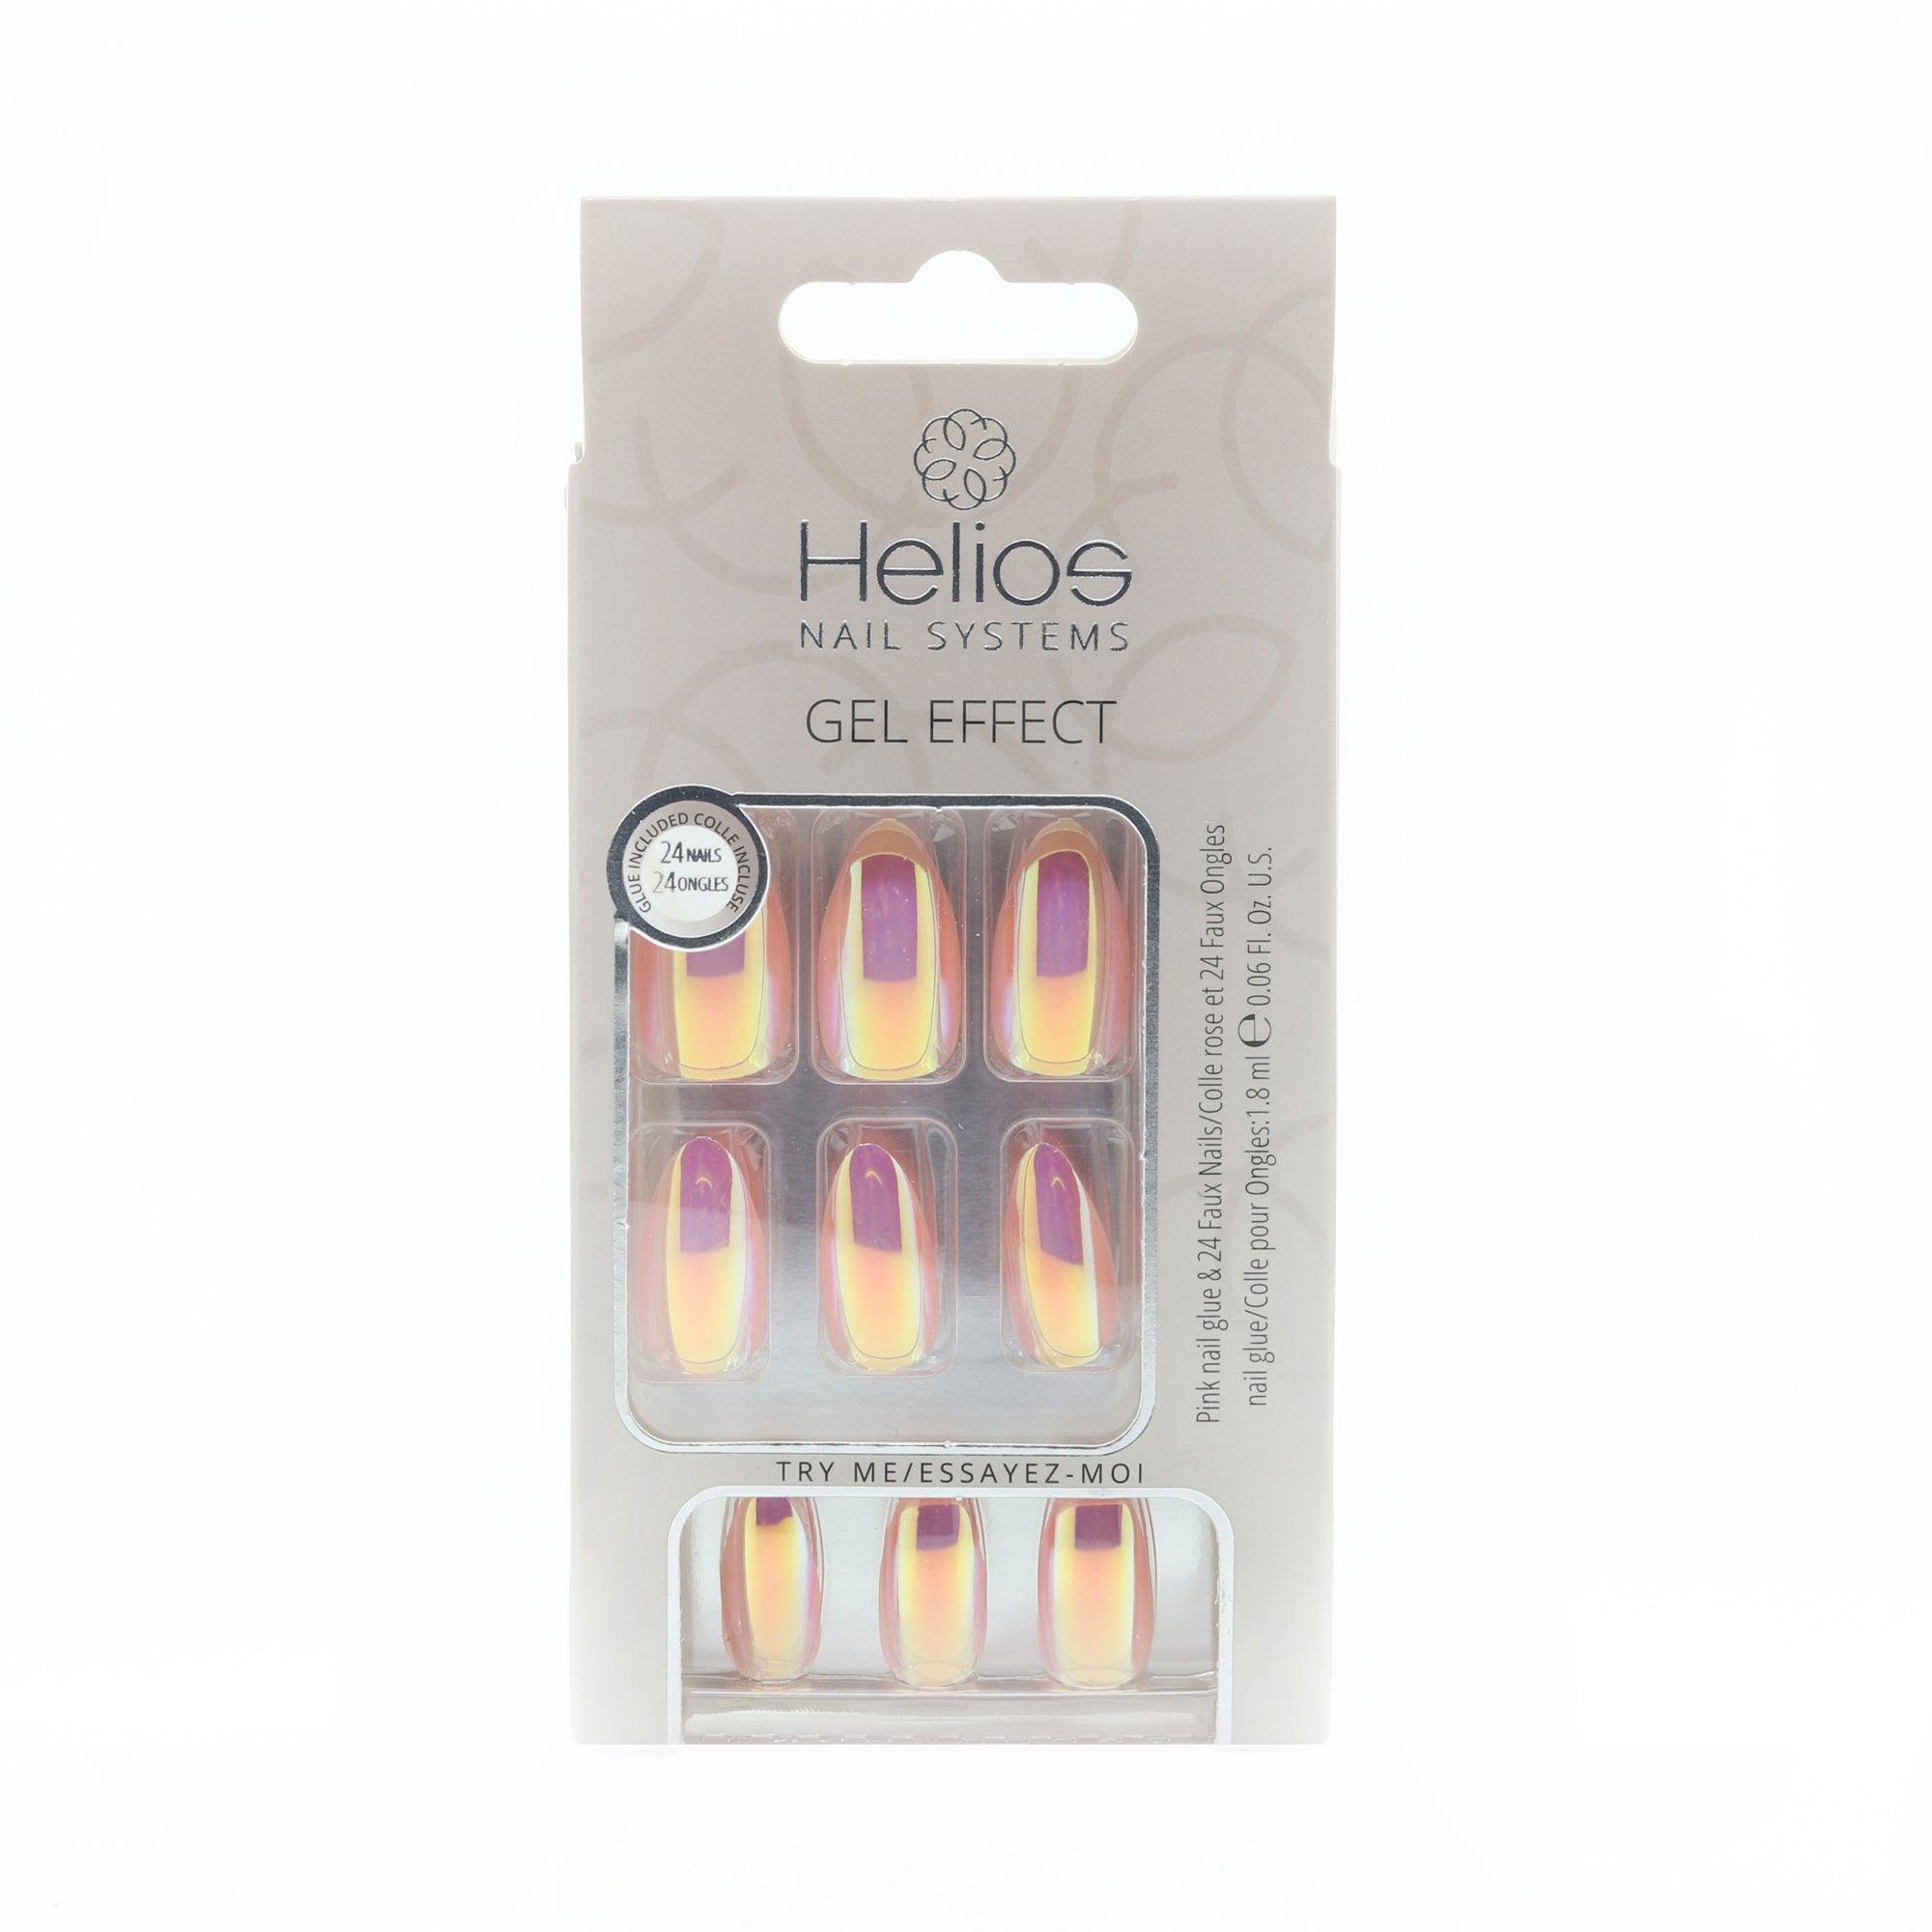 GEL EFFECT - Helios Nail Systems